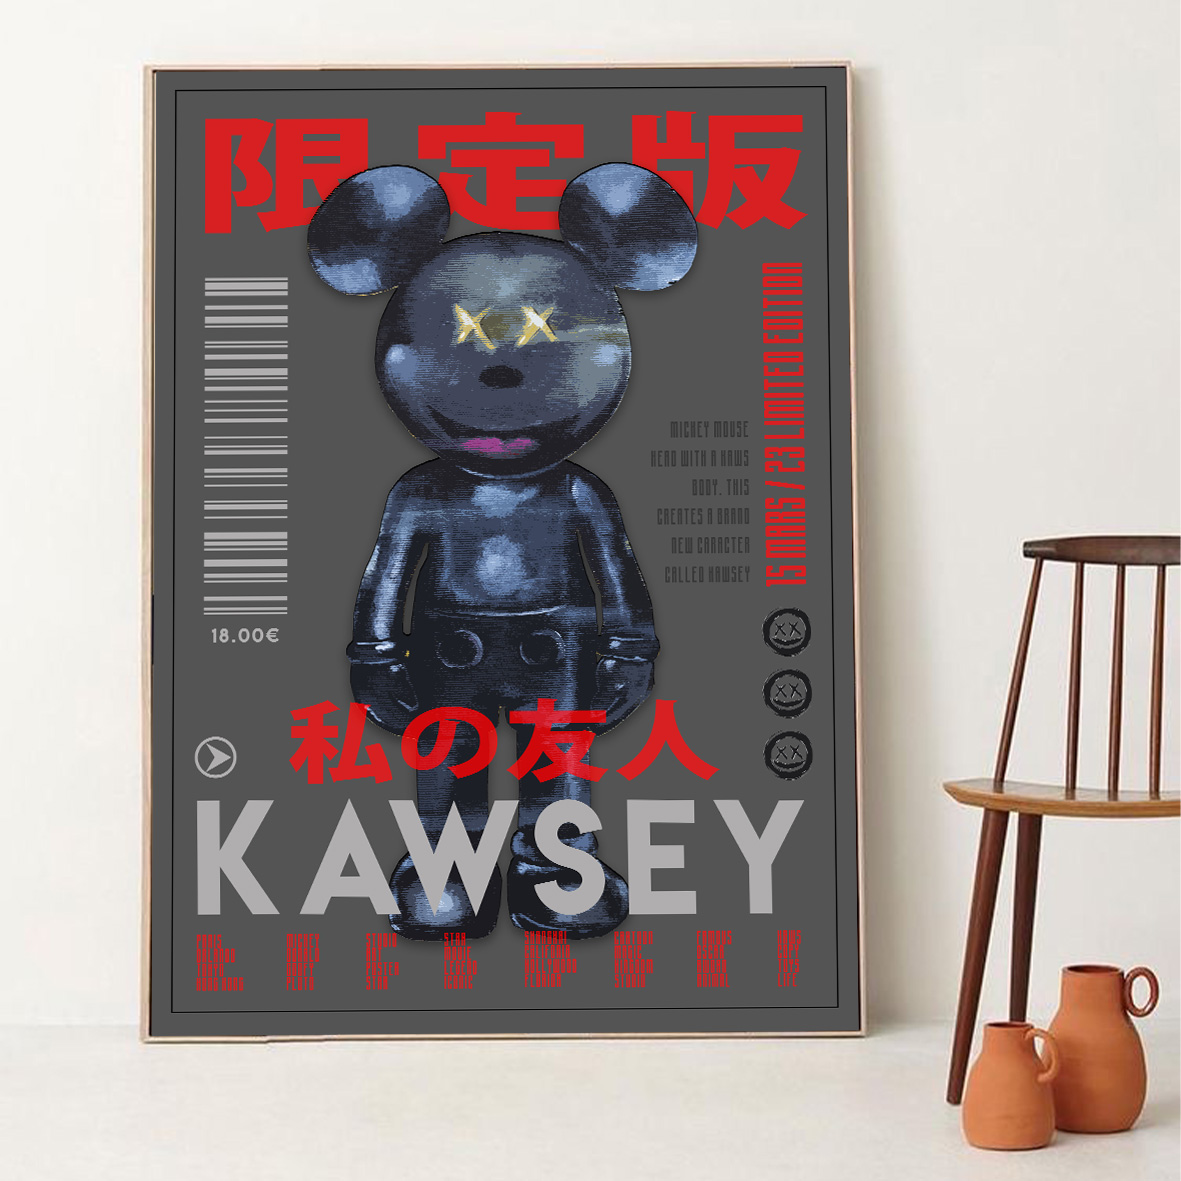 Kawsey front page